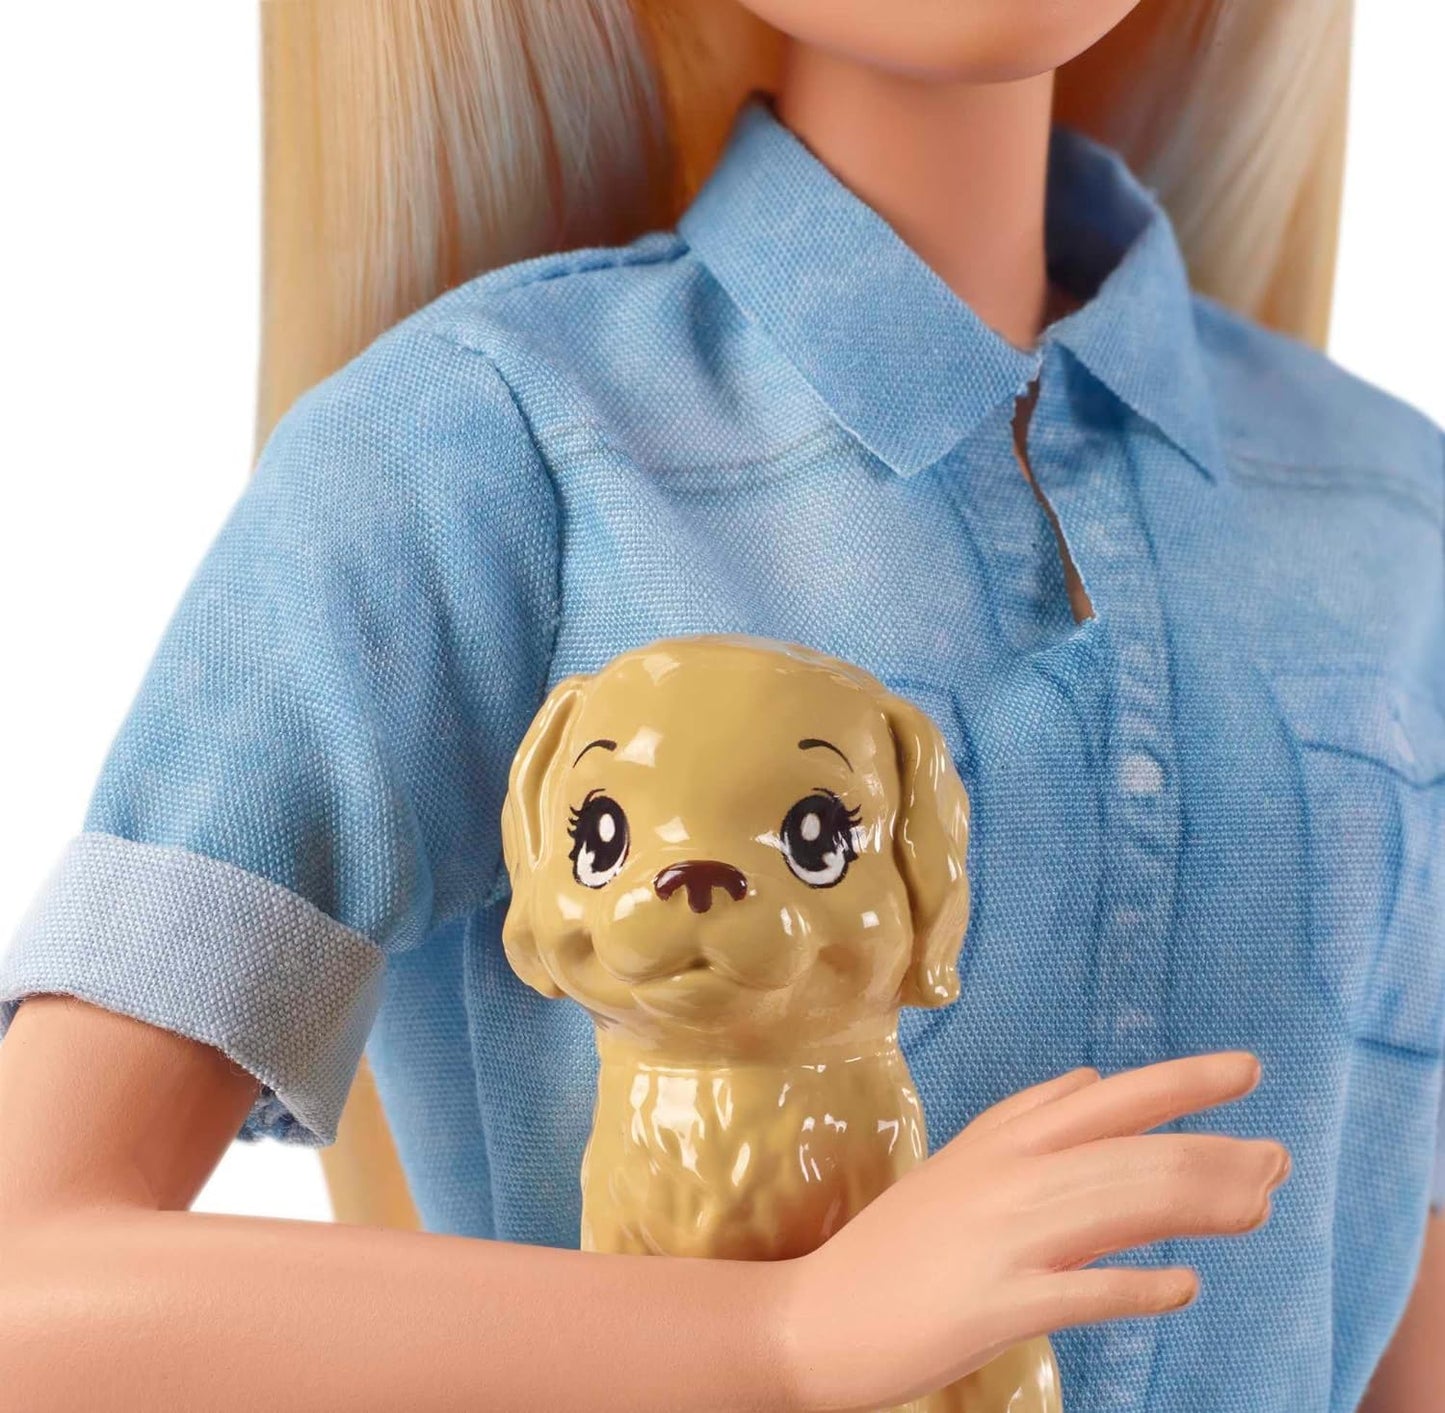 ​ Travel Doll, Blonde, with Puppy, Opening Suitcase, Stickers and 10+ Accessories, for 3 to 7 Year Olds, FWV25